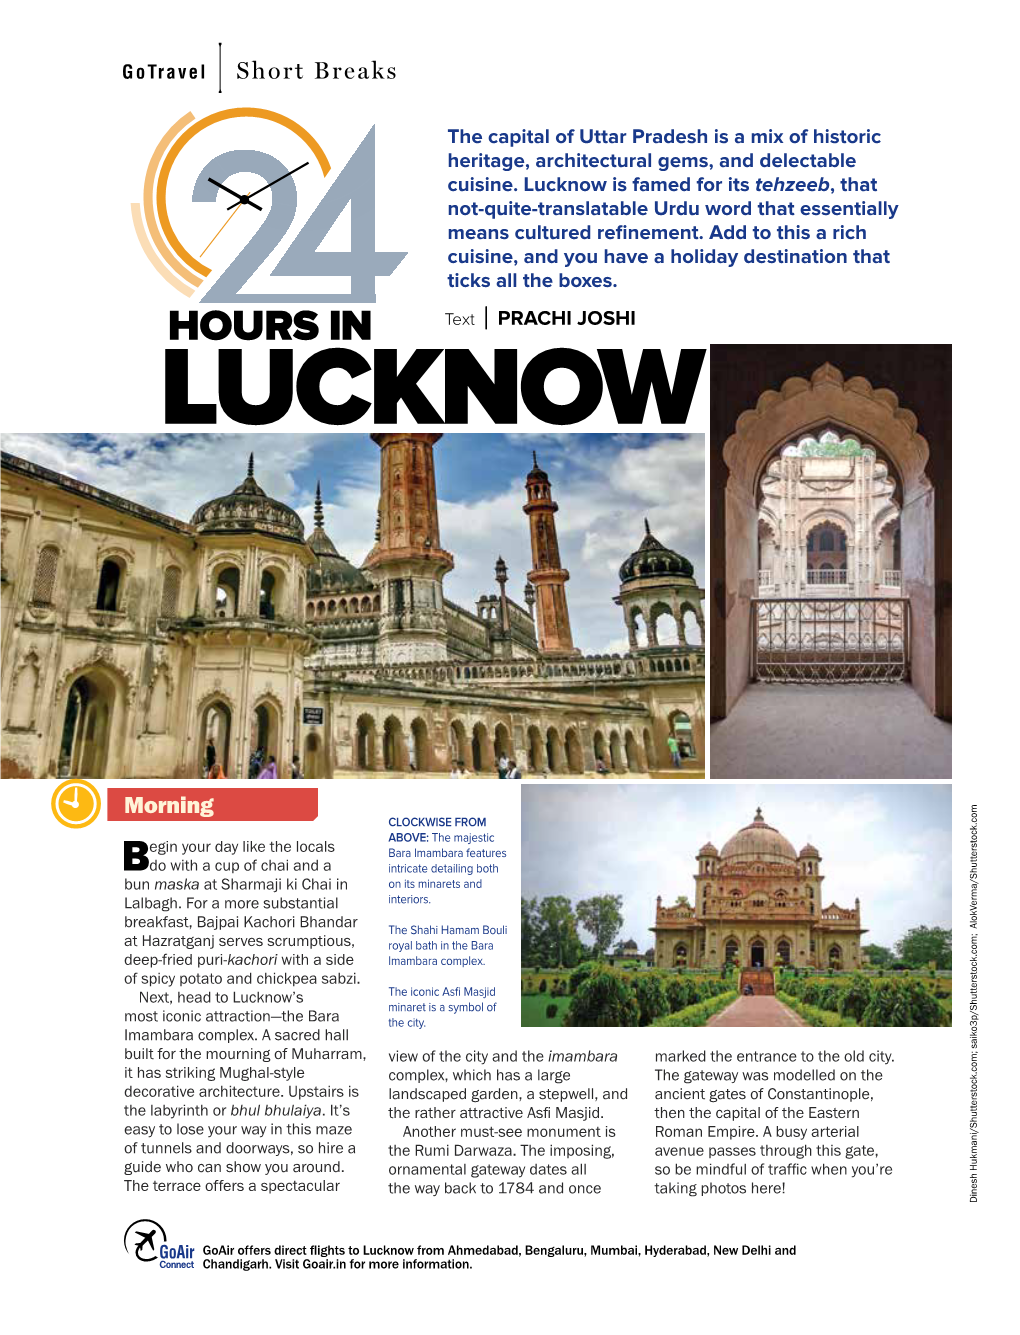 Lucknow Is Famed for Its Tehzeeb, That Not-Quite-Translatable Urdu Word That Essentially Means Cultured Refinement